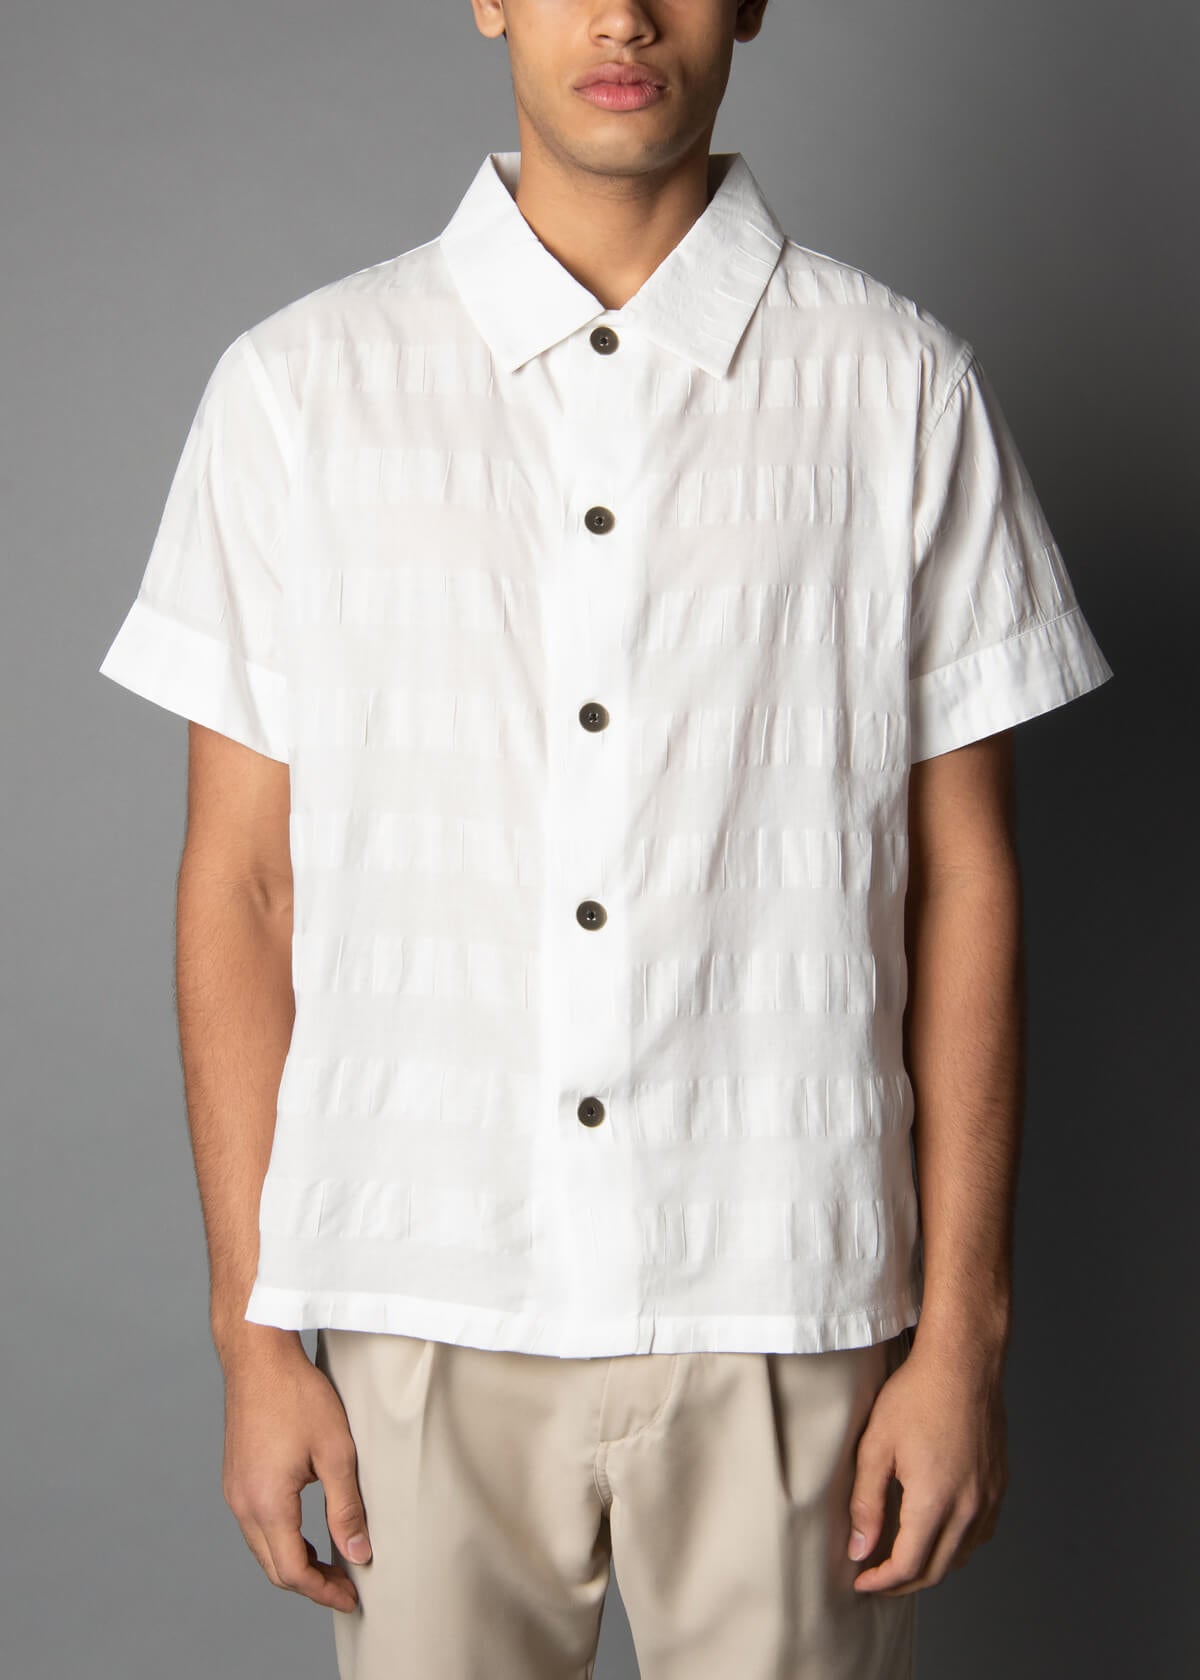 white short sleeve mens shirt crafted from cotton and linen